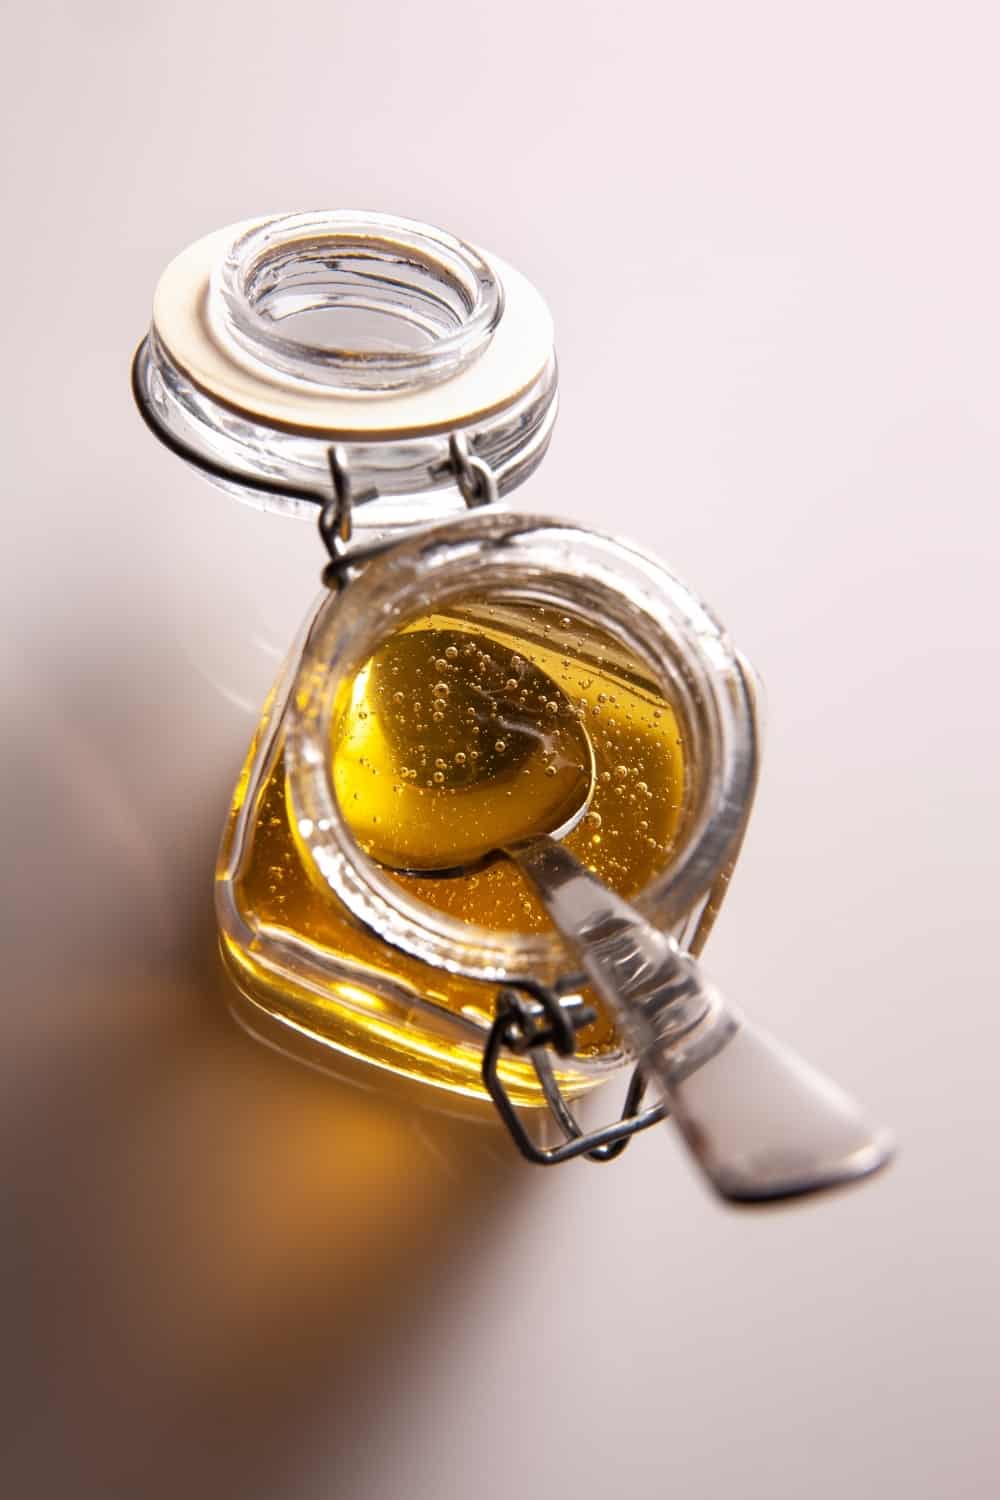 detail of agave syrup in glass jar with spoon inside.